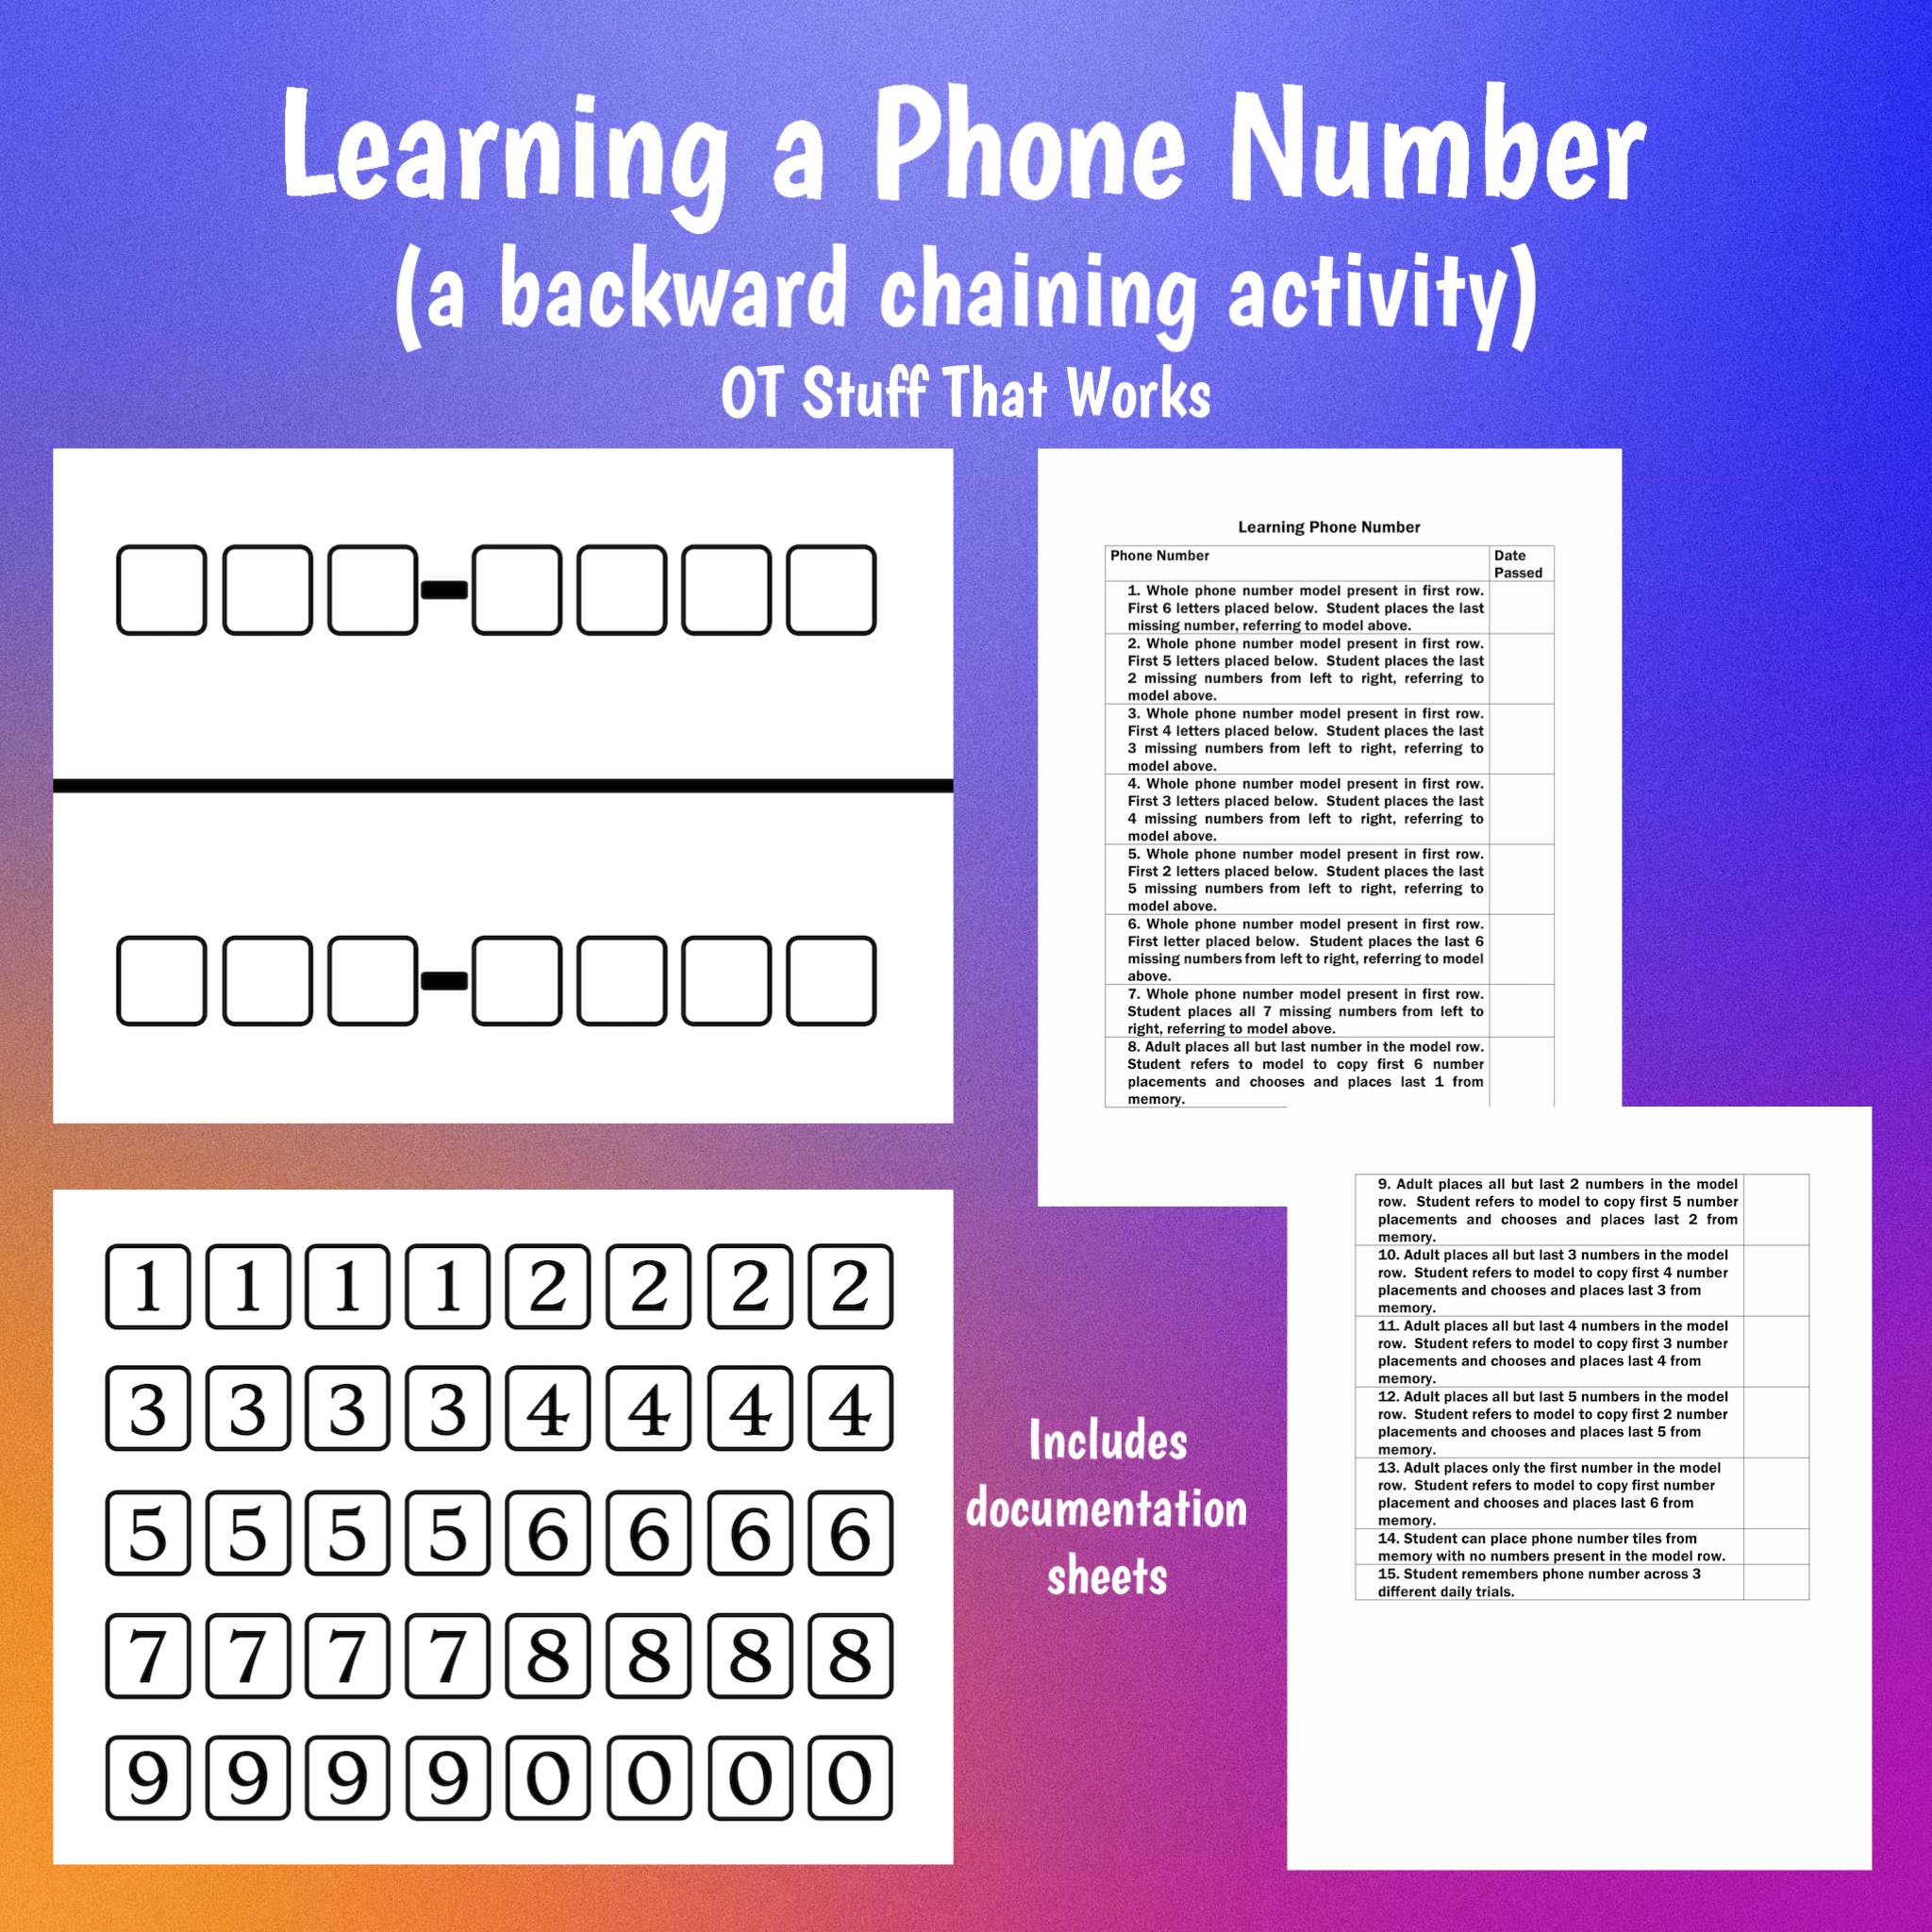 Learning a Phone Number (a backward chaining activity)